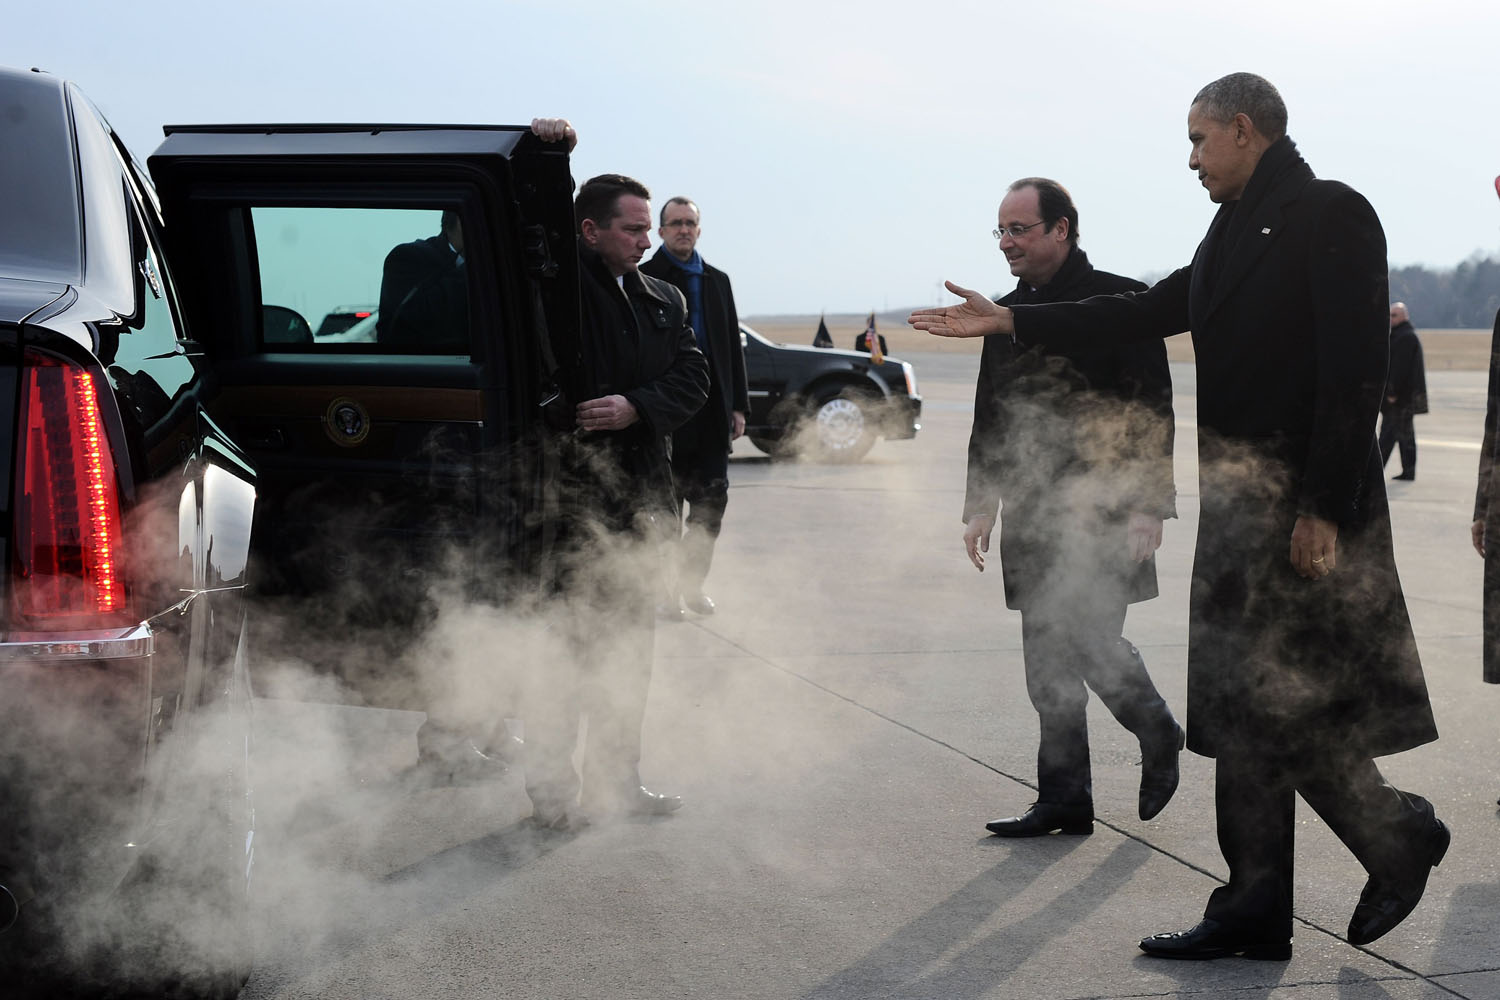 Feb. 10, 2014. U.S. President Barack Obama shows way to his French counterpart Francois Hollande after disembarking from Air Force One at Charlottesville Albemarle Airport in Charlottesville, Virginia.